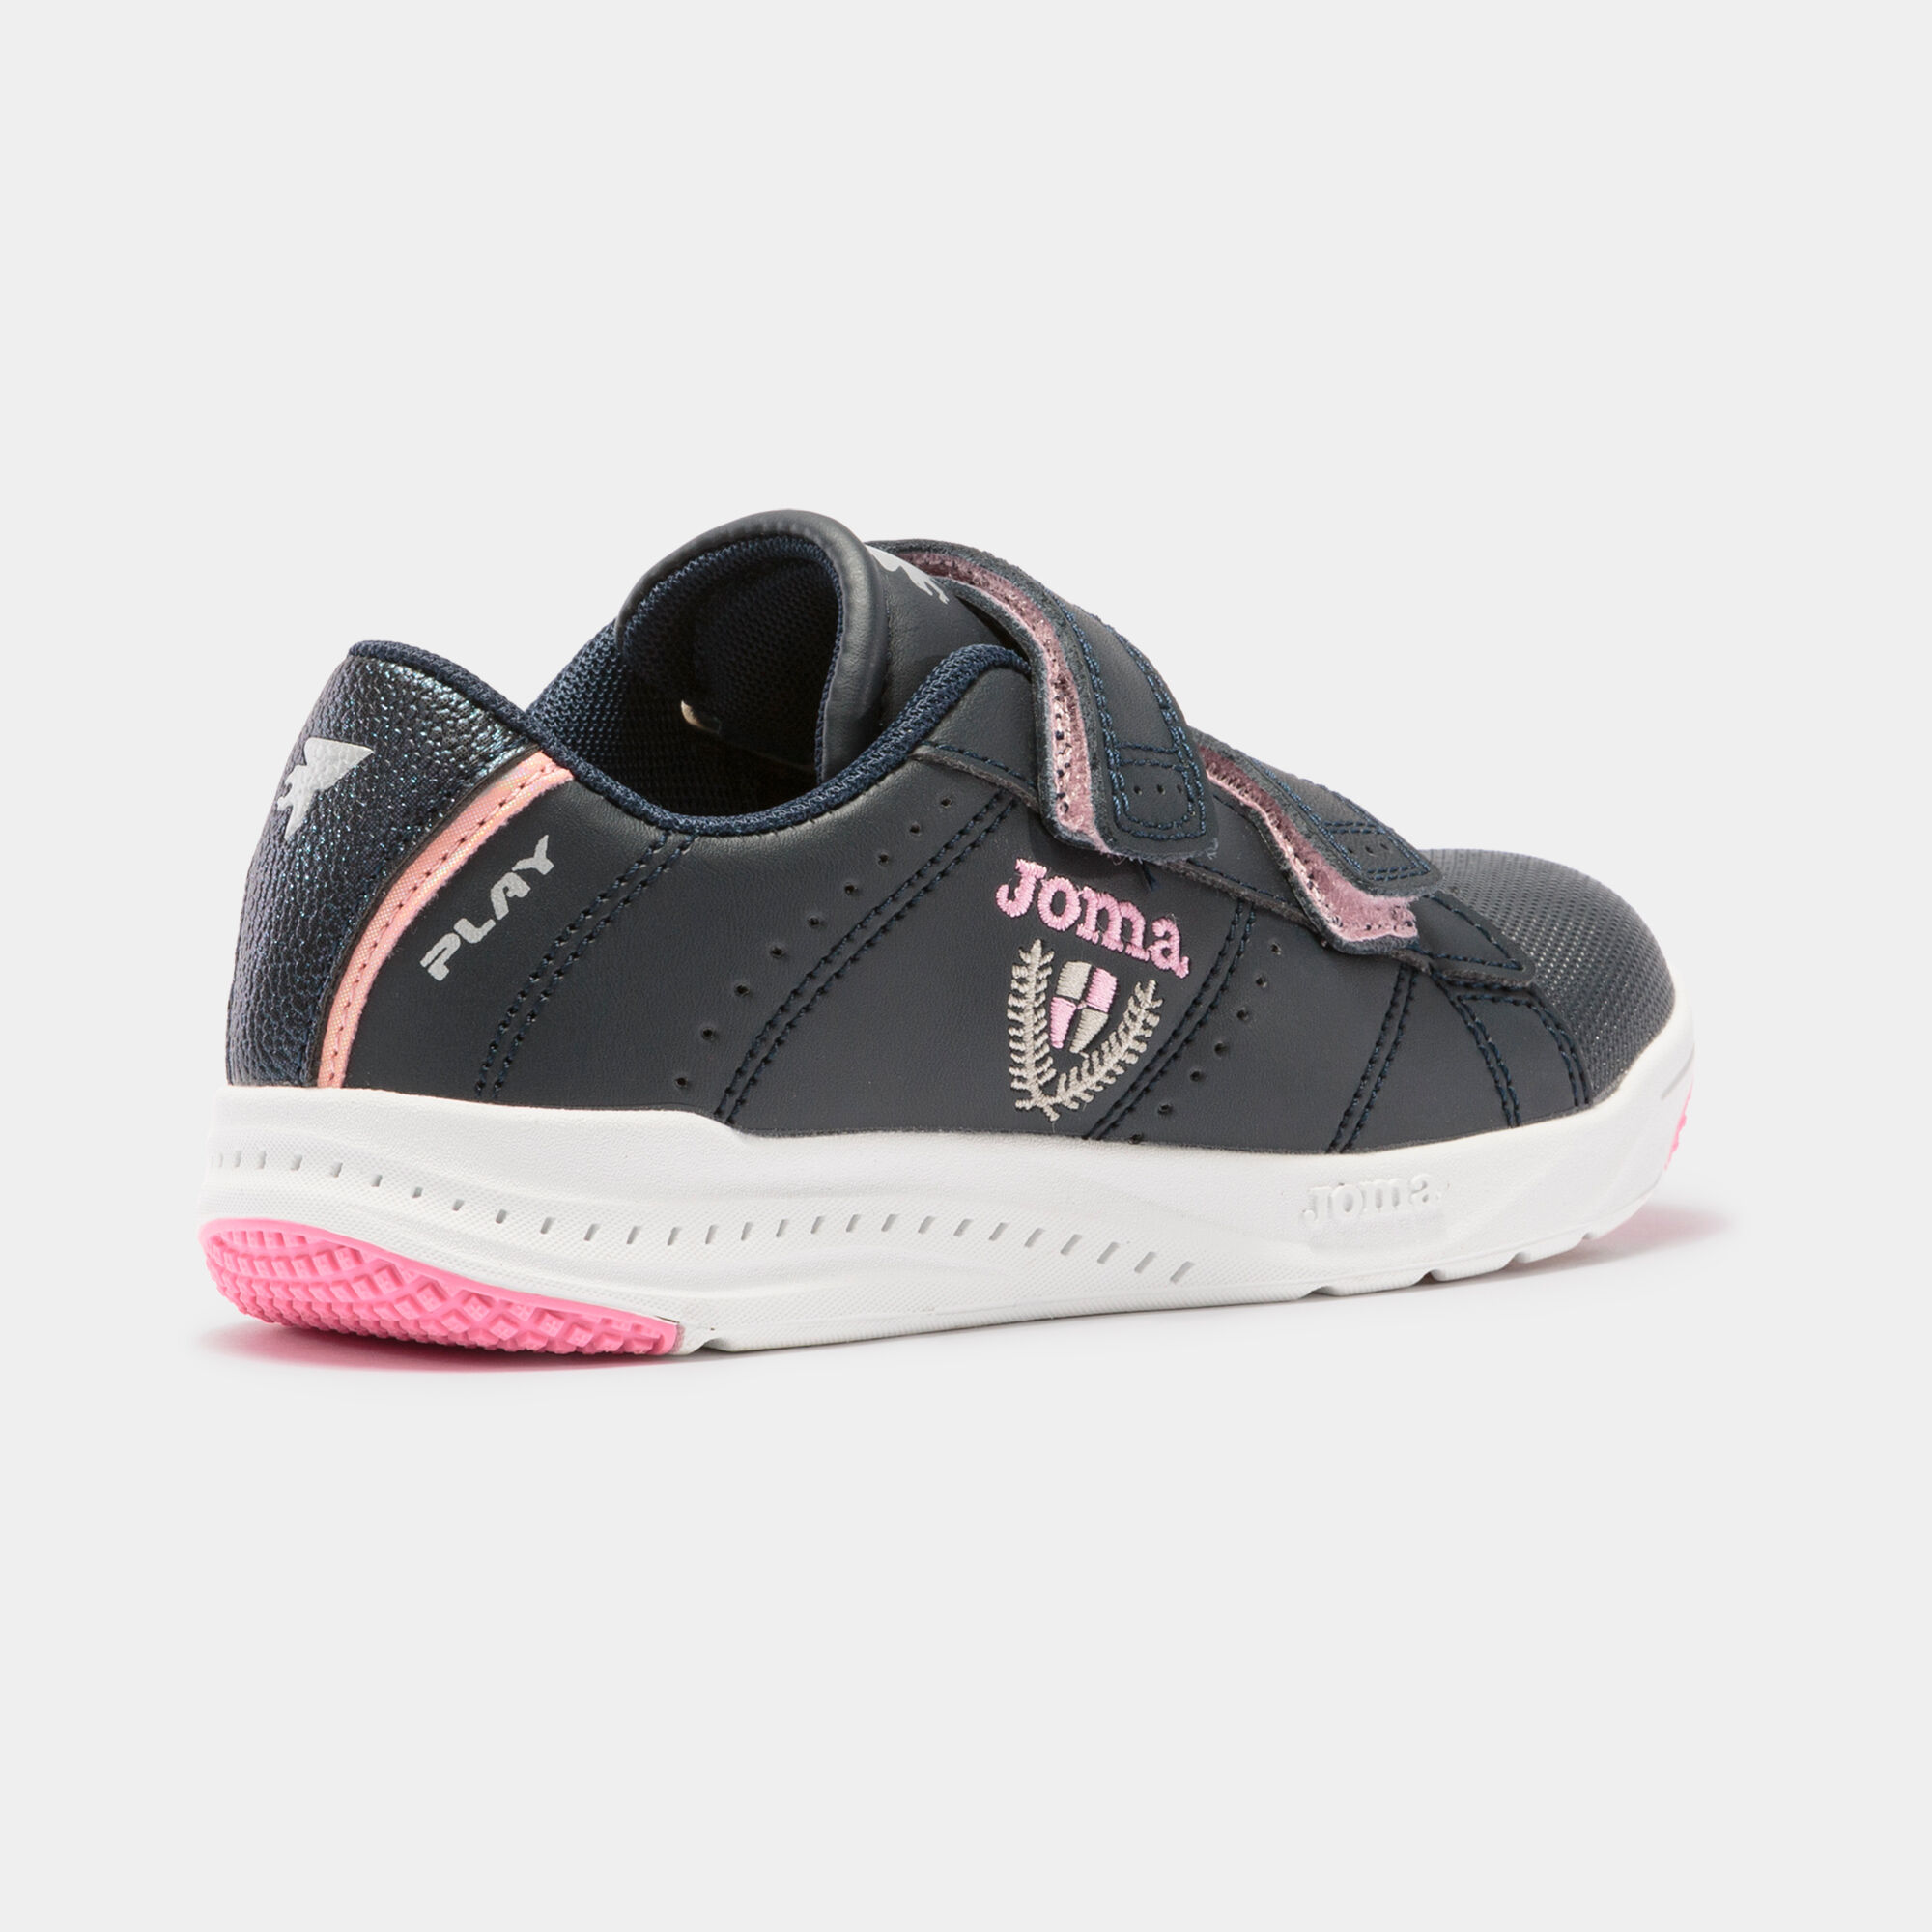 CASUAL SHOES PLAY 21 JUNIOR NAVY BLUE PINK